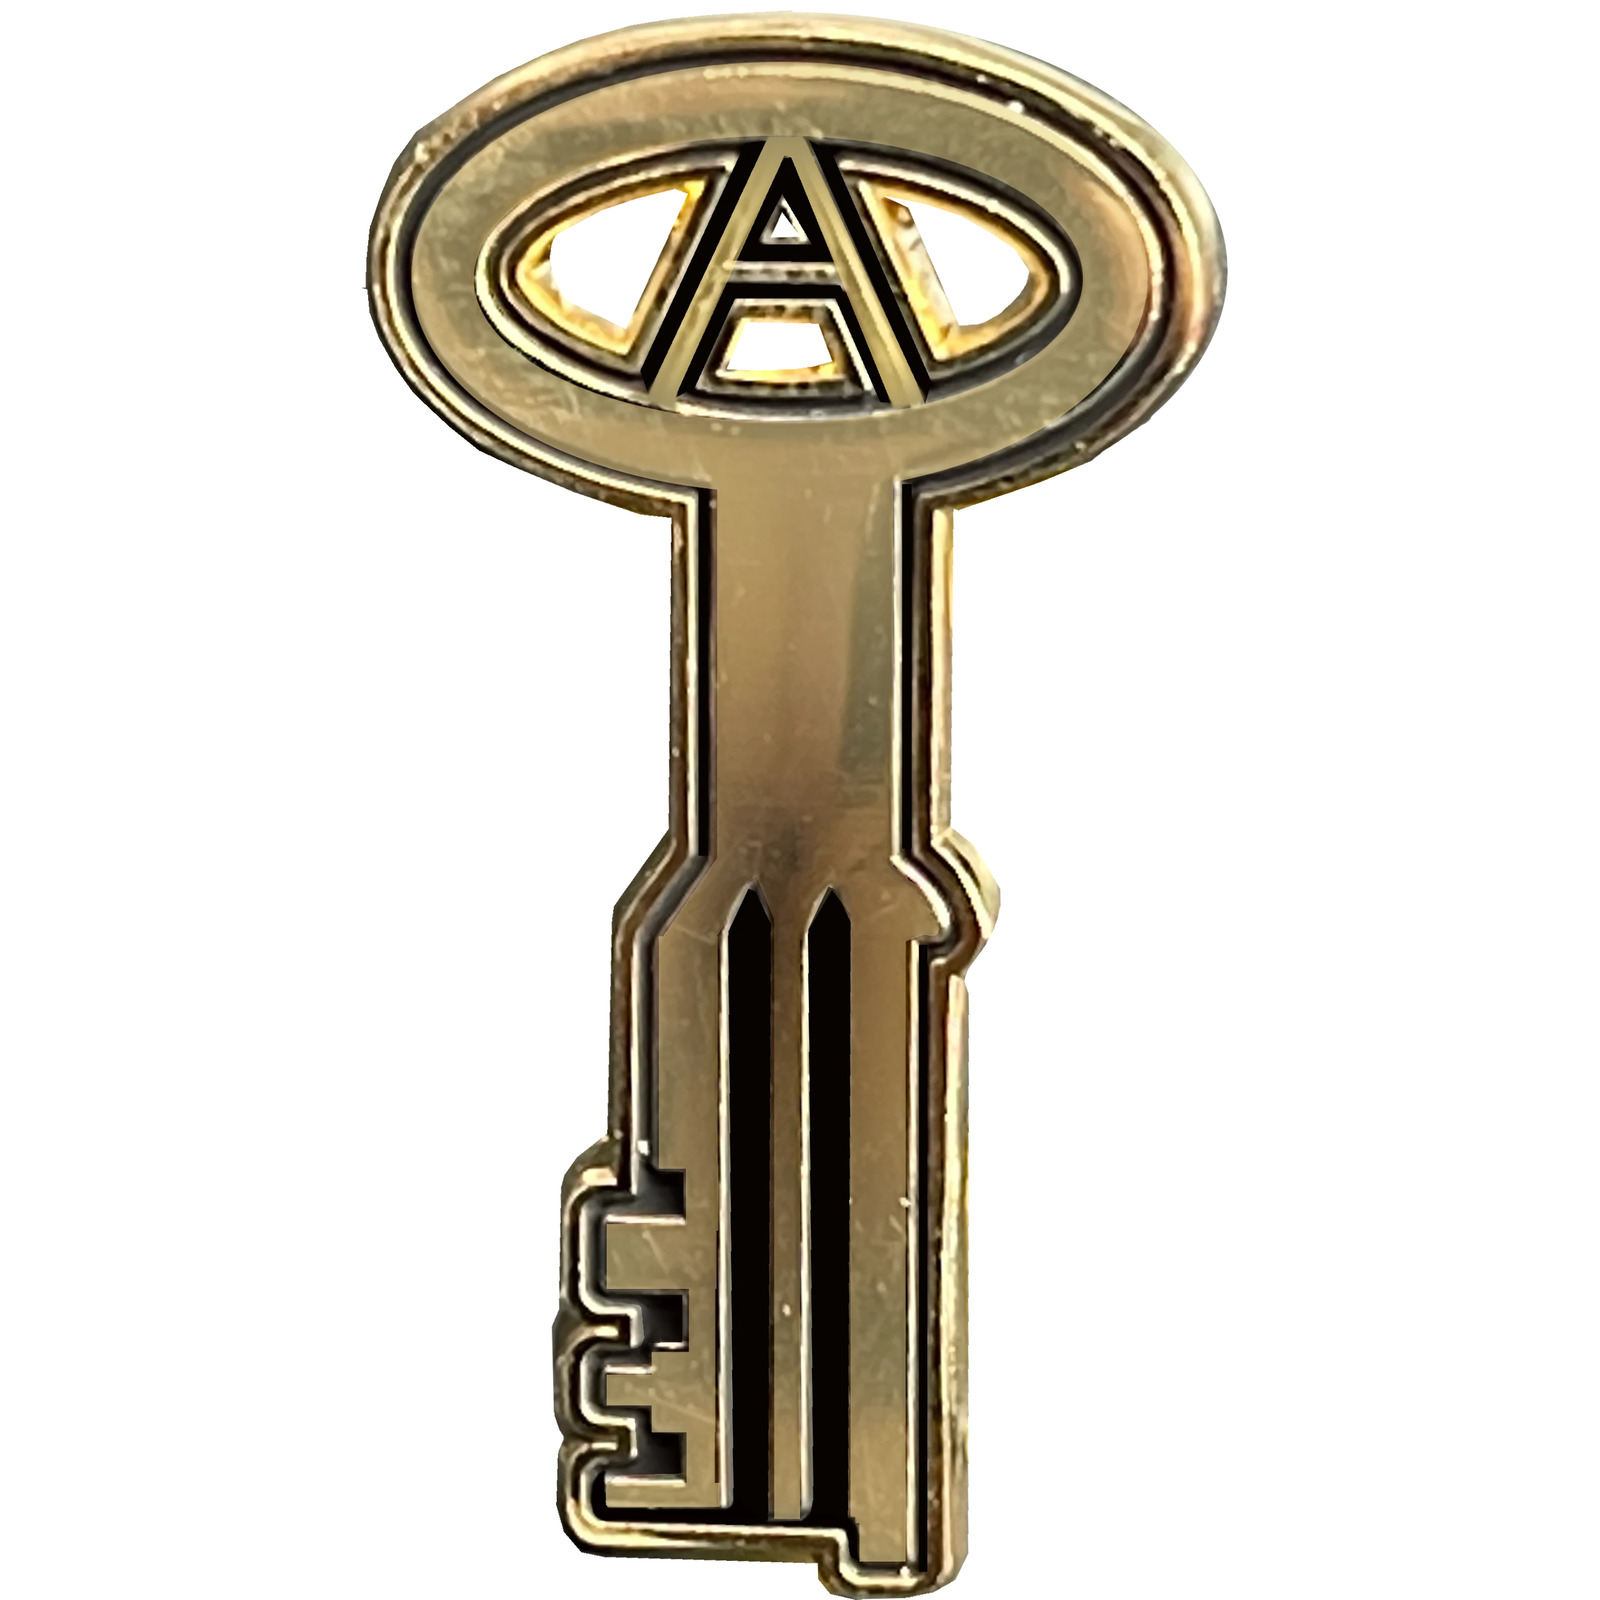 BL15-014 24KT Gold plated Correctional Officer Jail Prison Key pin CO Correction